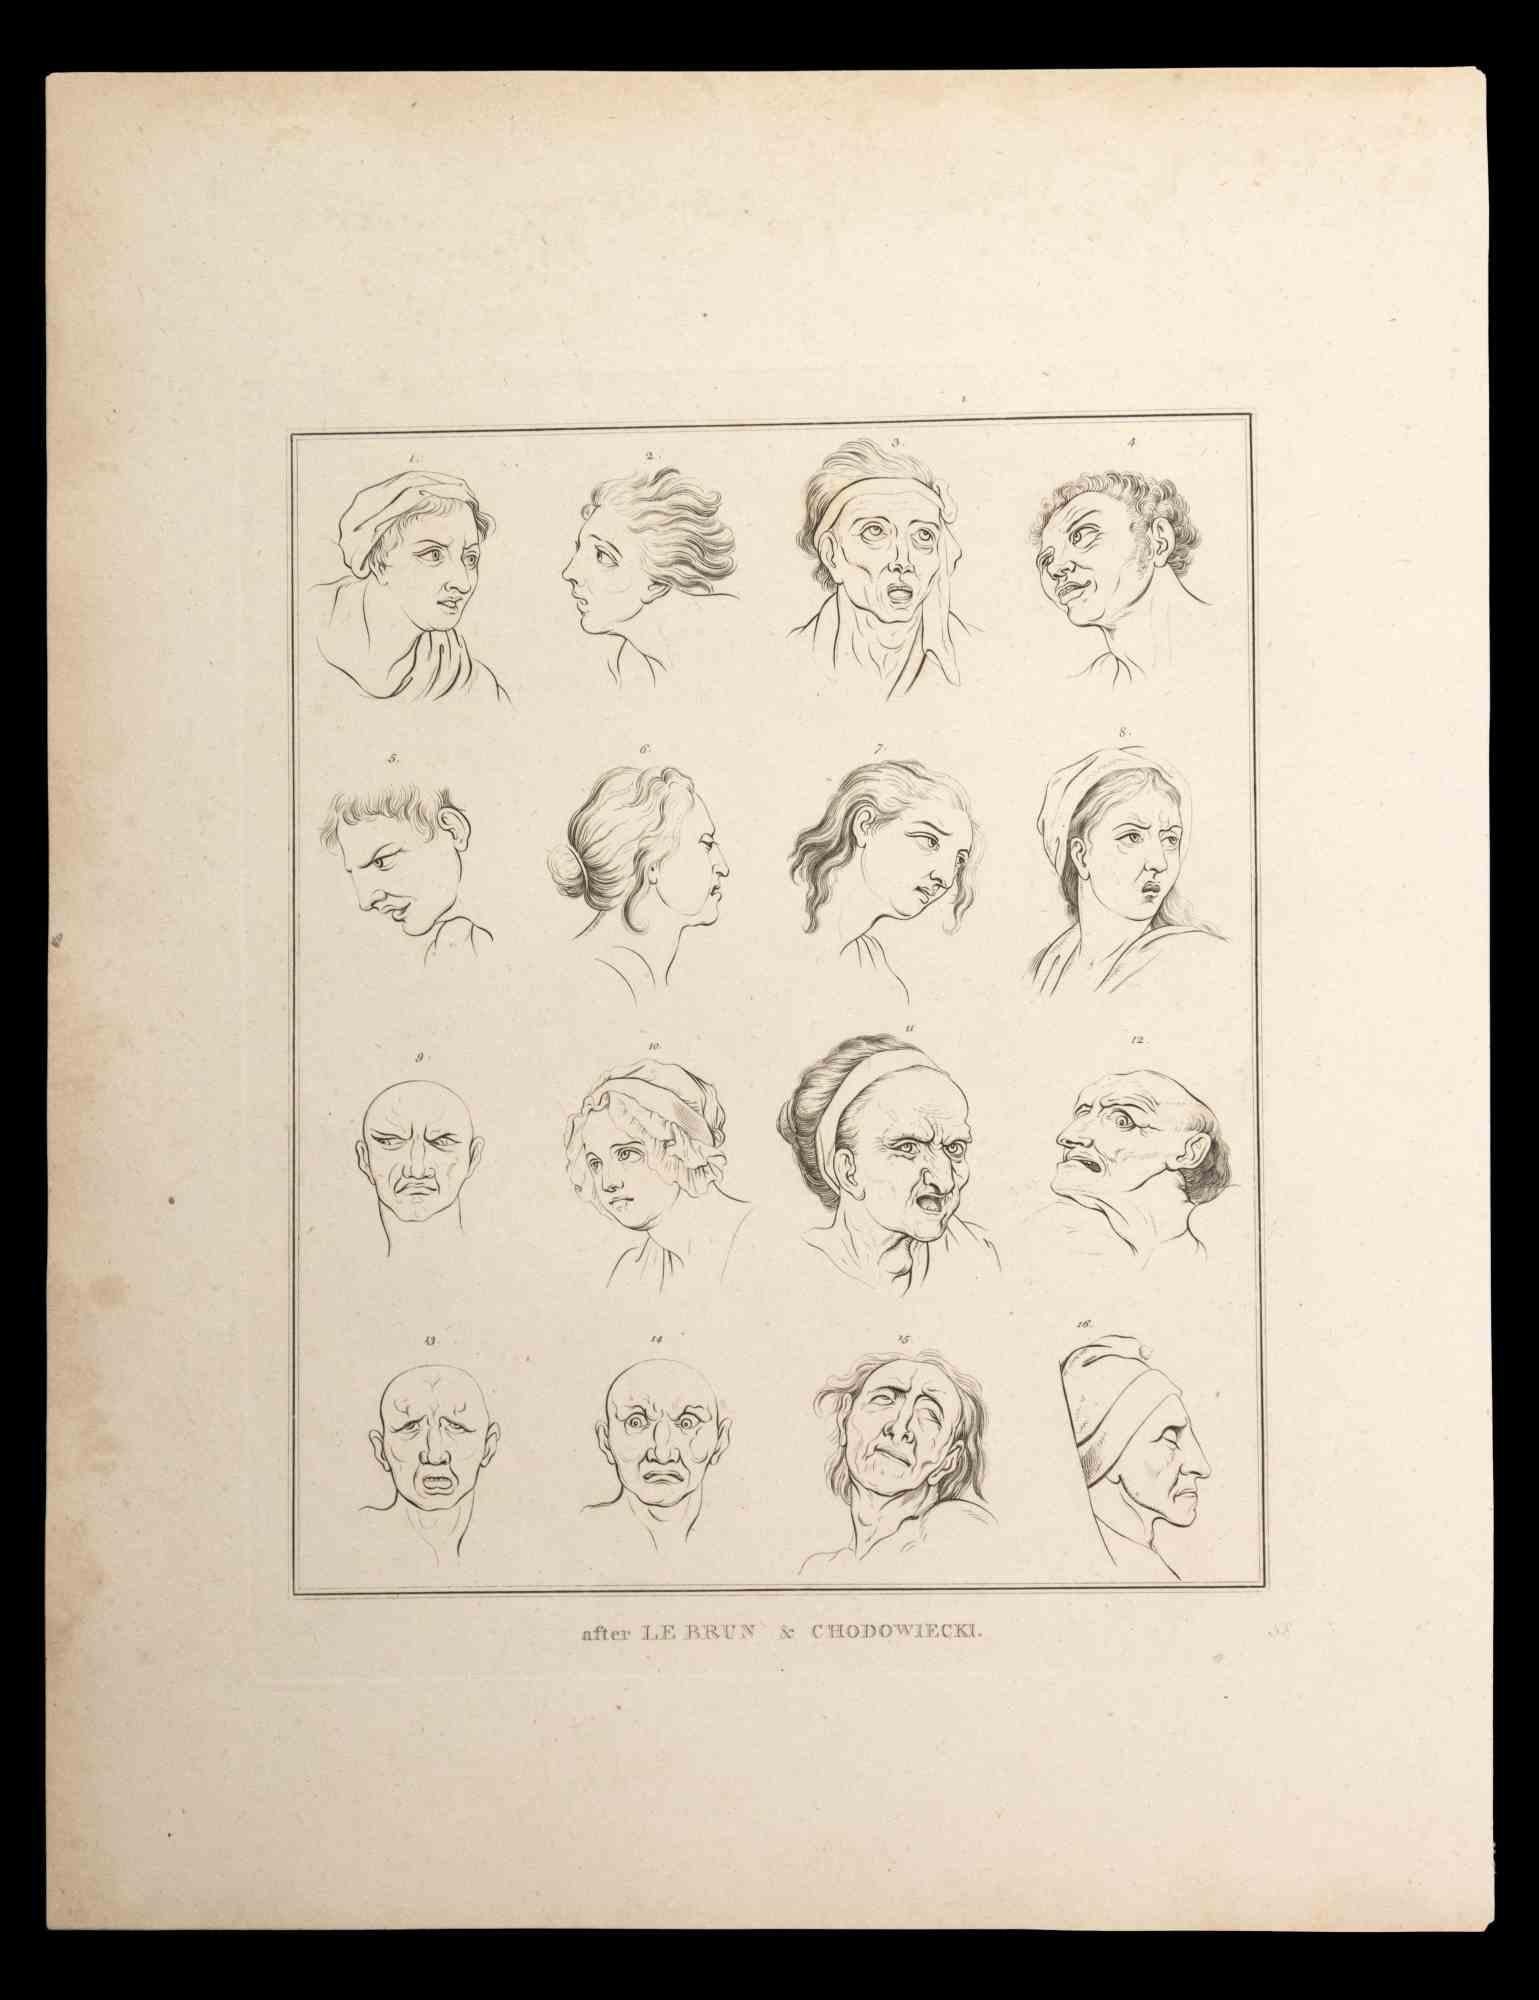 Portrait of men and women is an original etching ar realized by Thomas Holloway after Lebrun and Chodowiecki, for Johann Caspar Lavater's "Essays on Physiognomy, Designed to Promote the Knowledge and the Love of Mankind", London, Bensley, 1810.